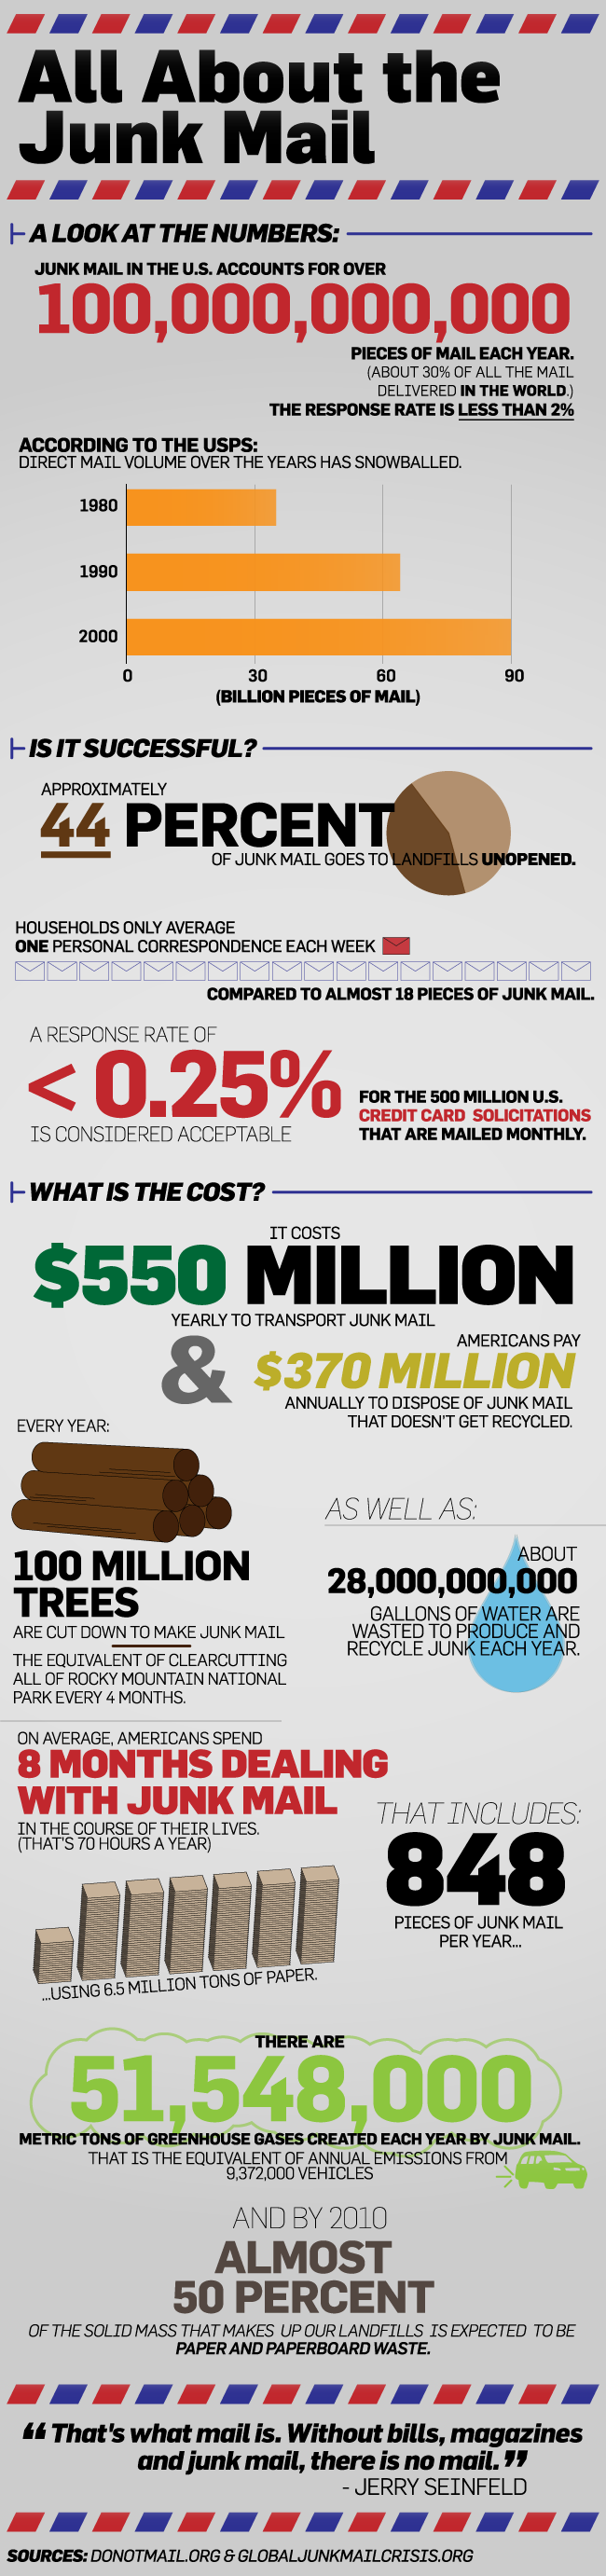 All About Junk Mail [infographic]